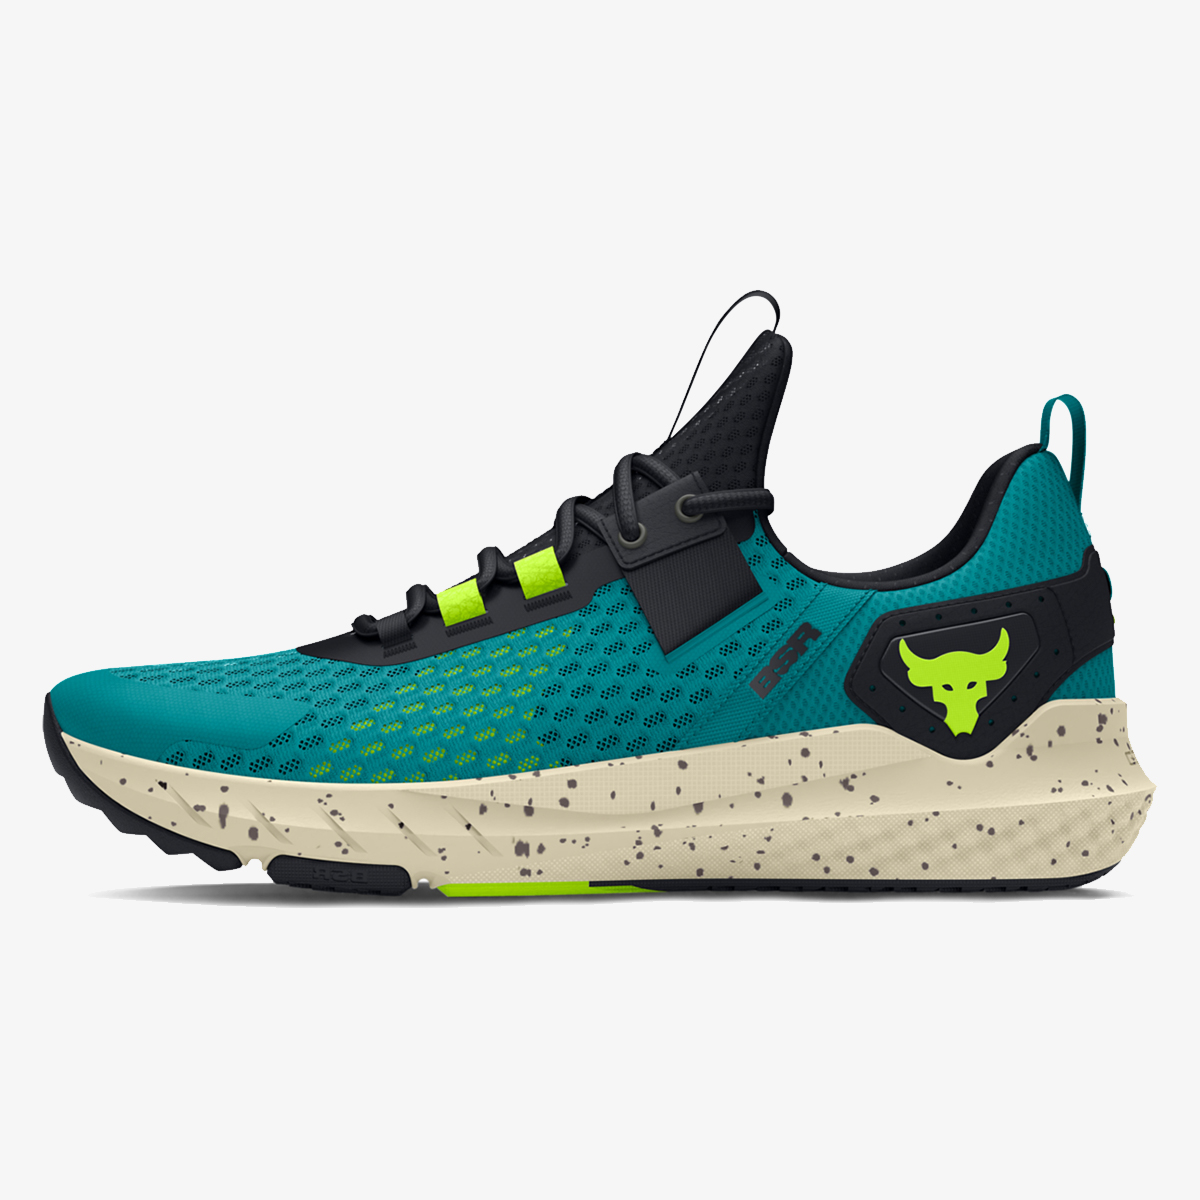 UNDER ARMOUR Project Rock BSR 4